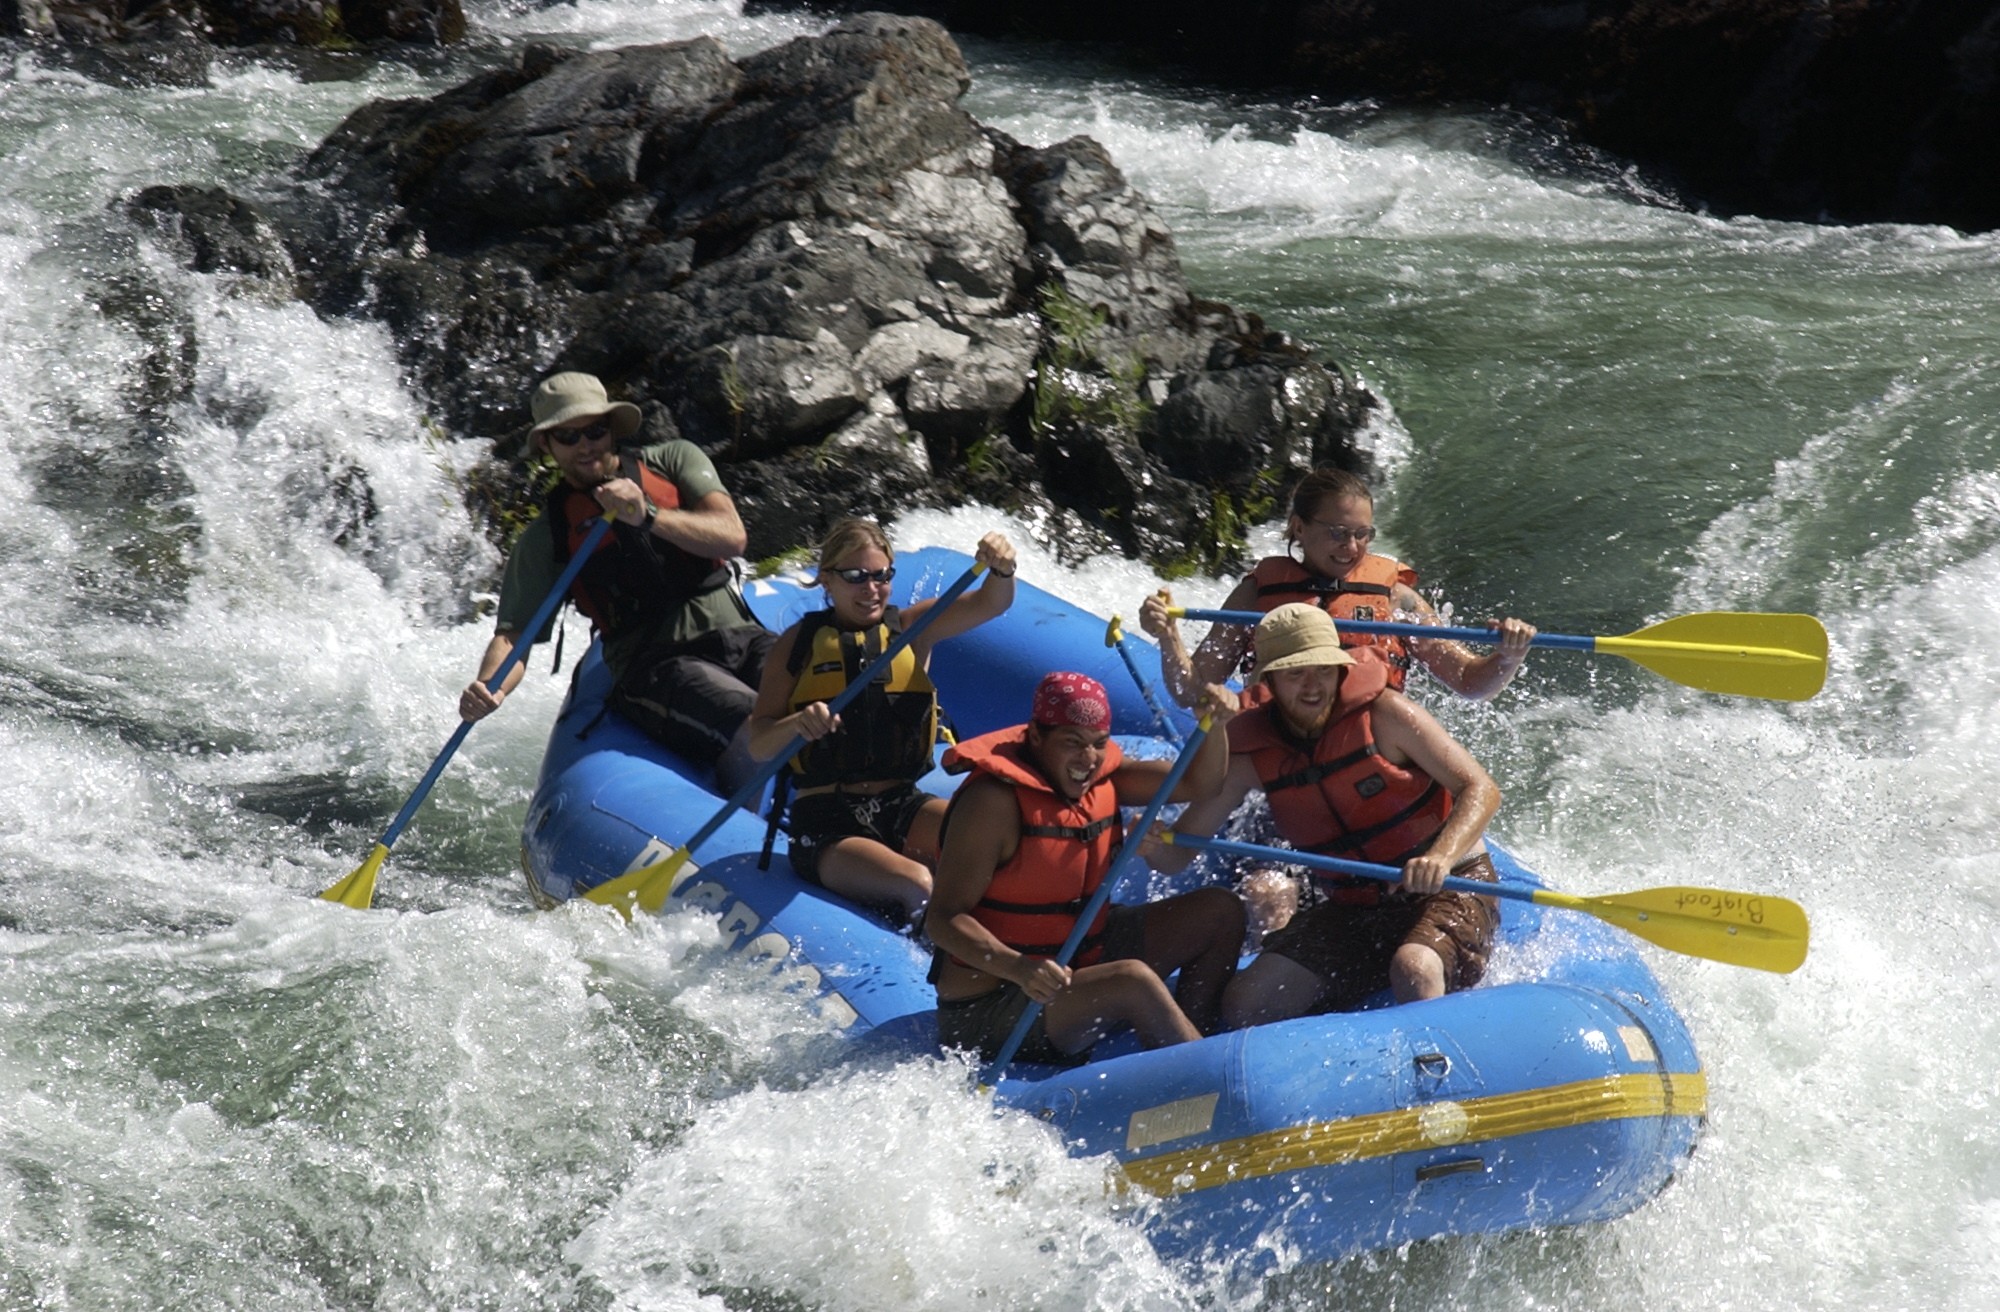 Whitewater rafting on the Klamath River